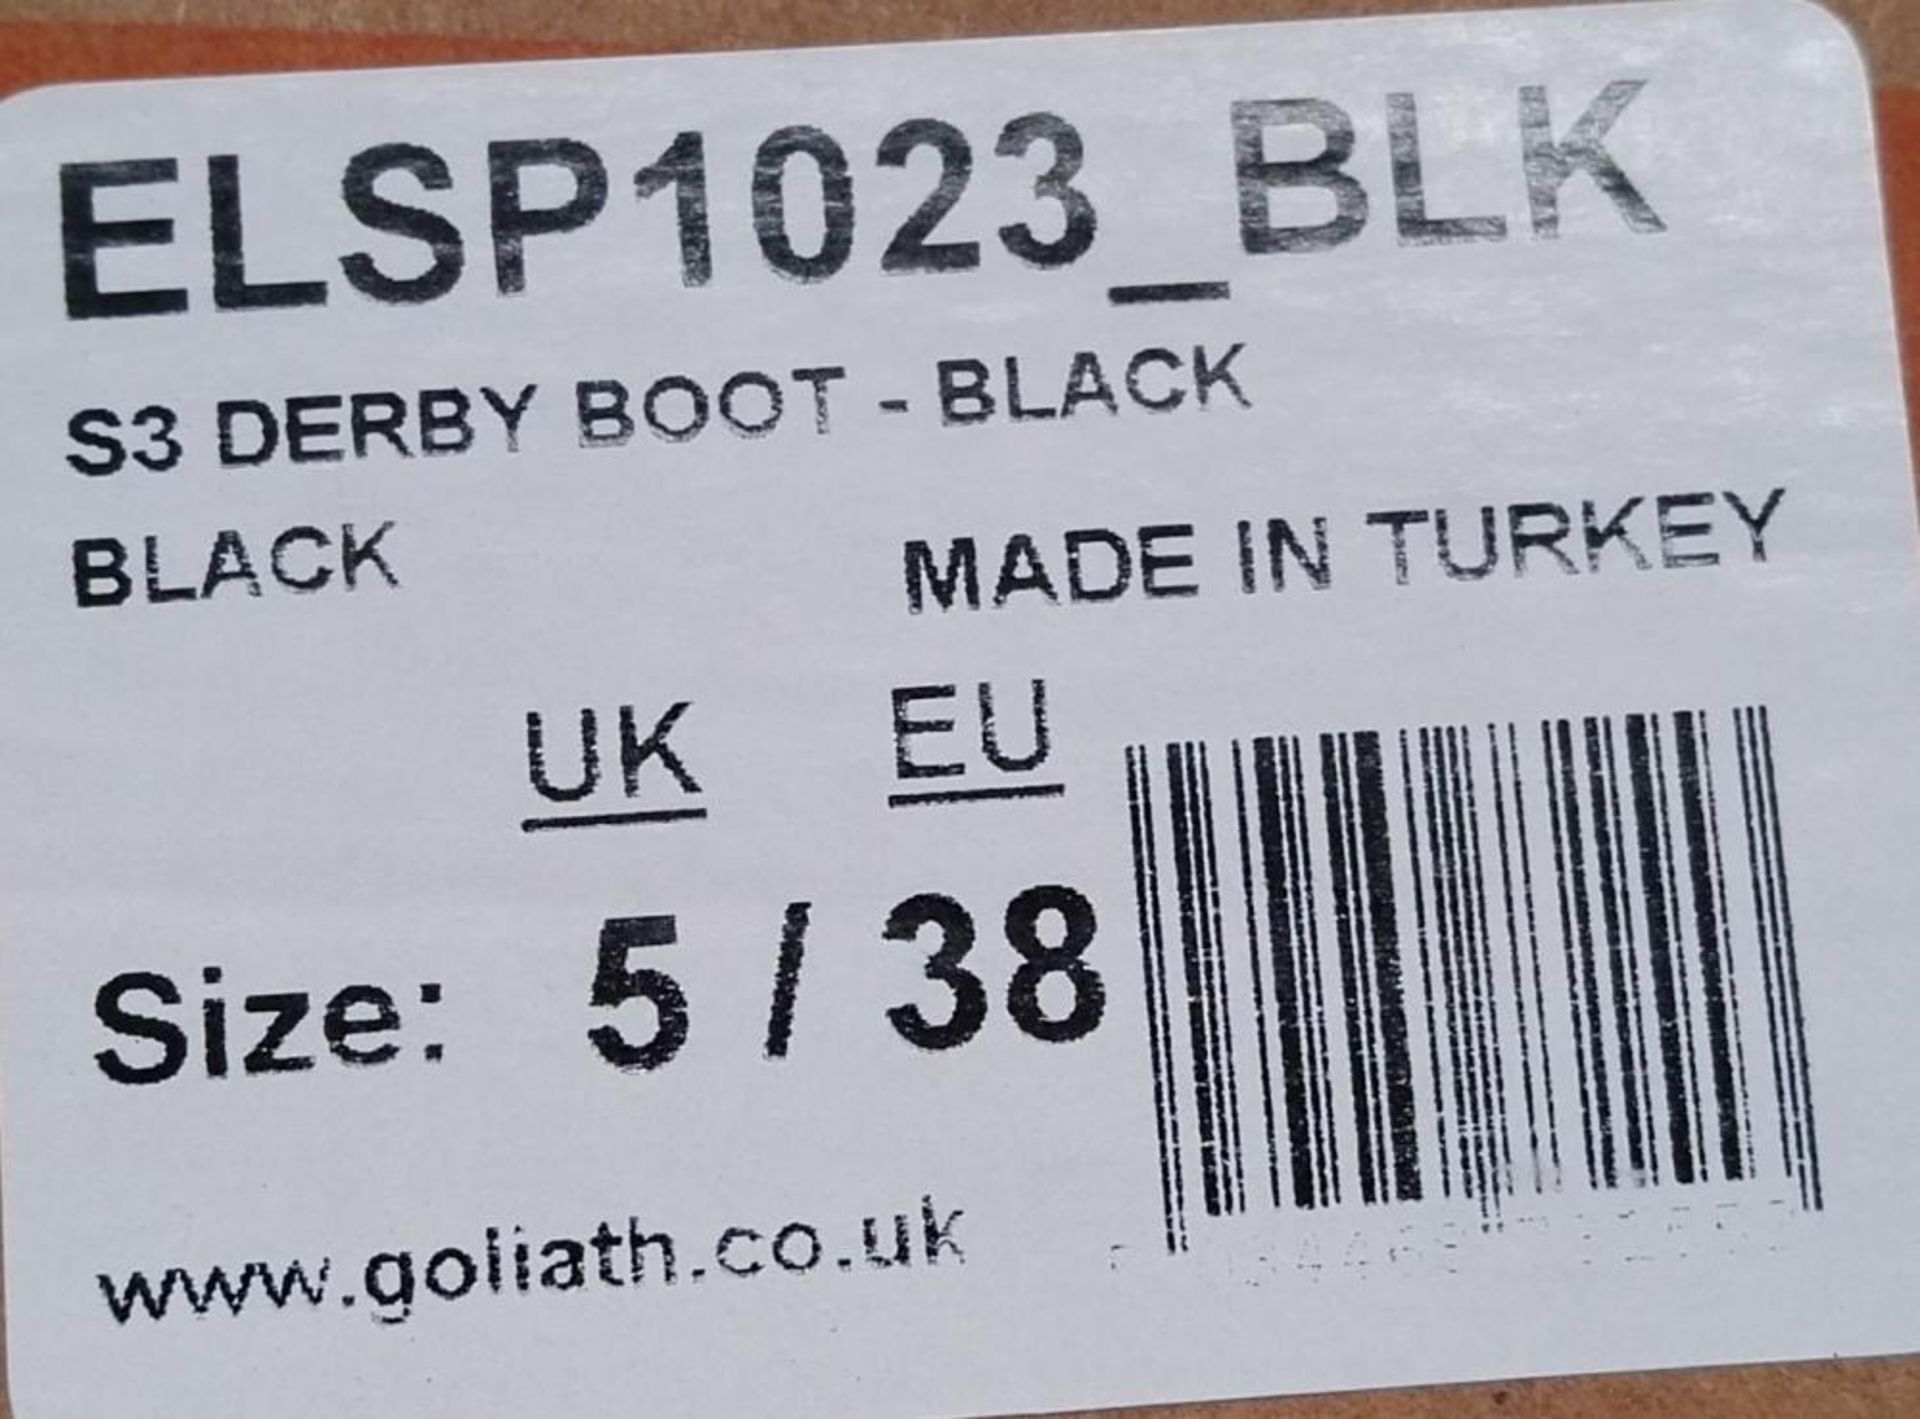 1 x Pair of Goliath ELSP1023_BLK S3 Derby Boots in Black - Size 5/38 - CL185 - Ref: DSY0358 - New - Image 2 of 4